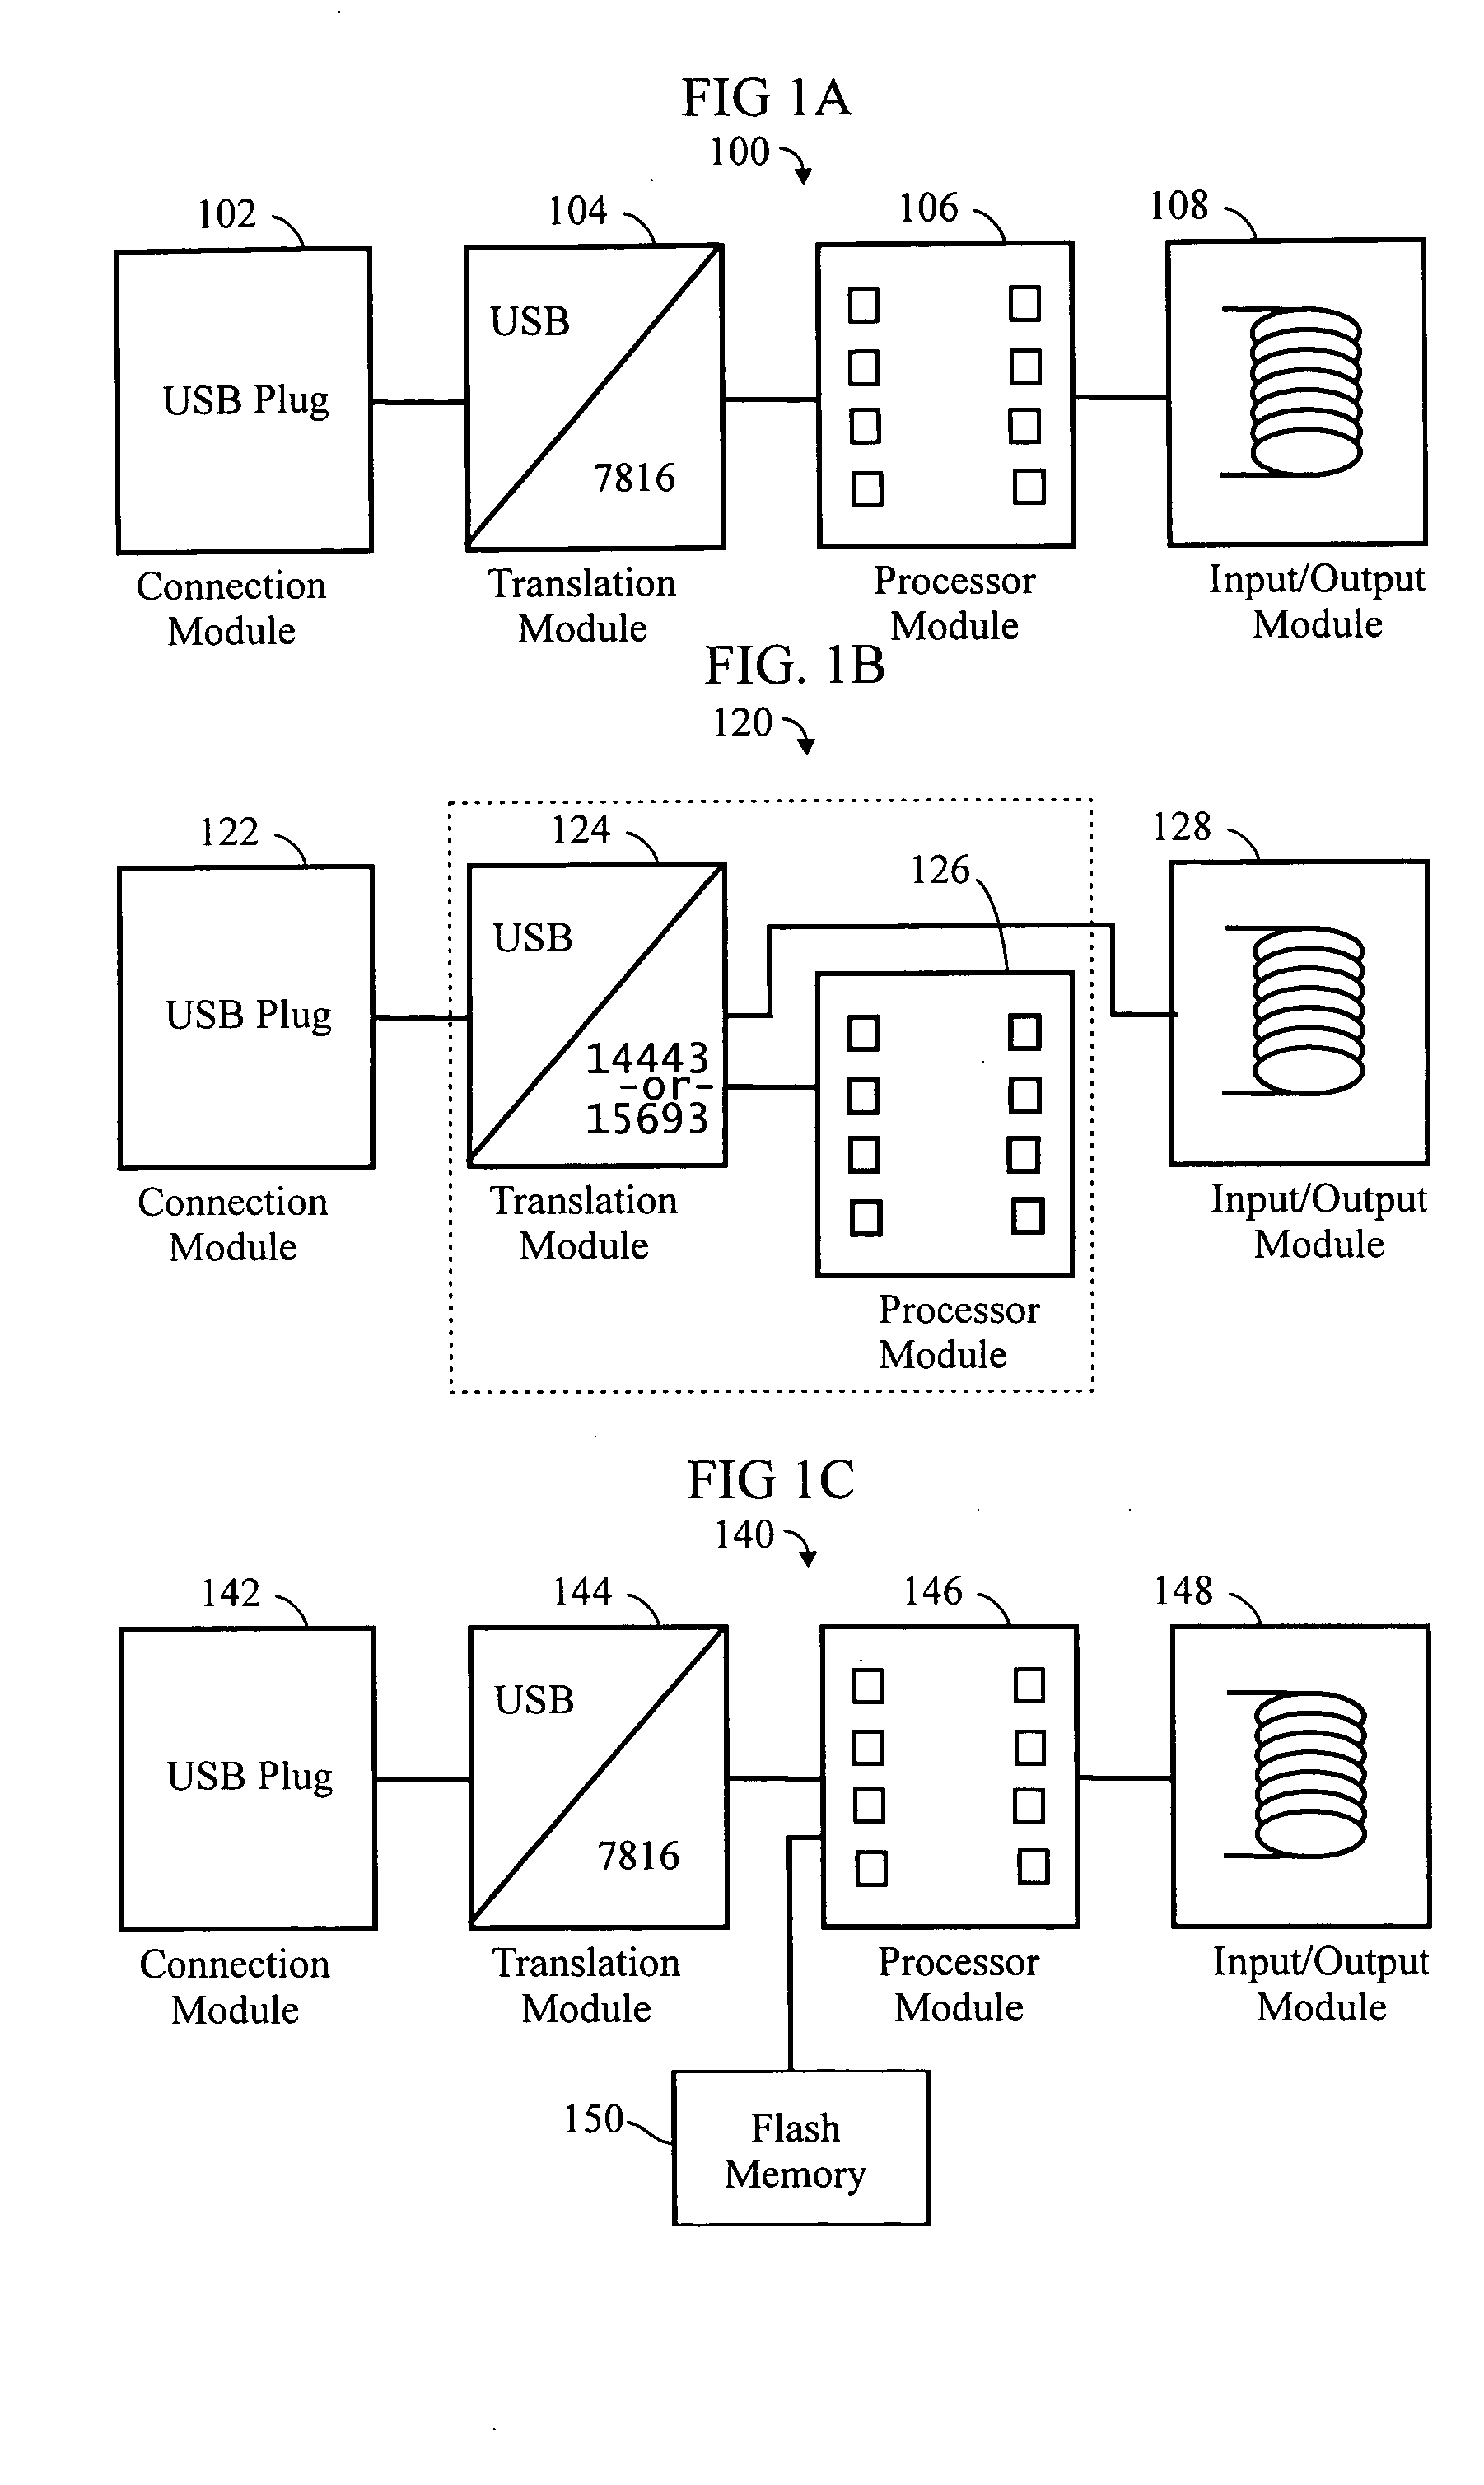 Multi-interface compact personal token apparatus and methods of use